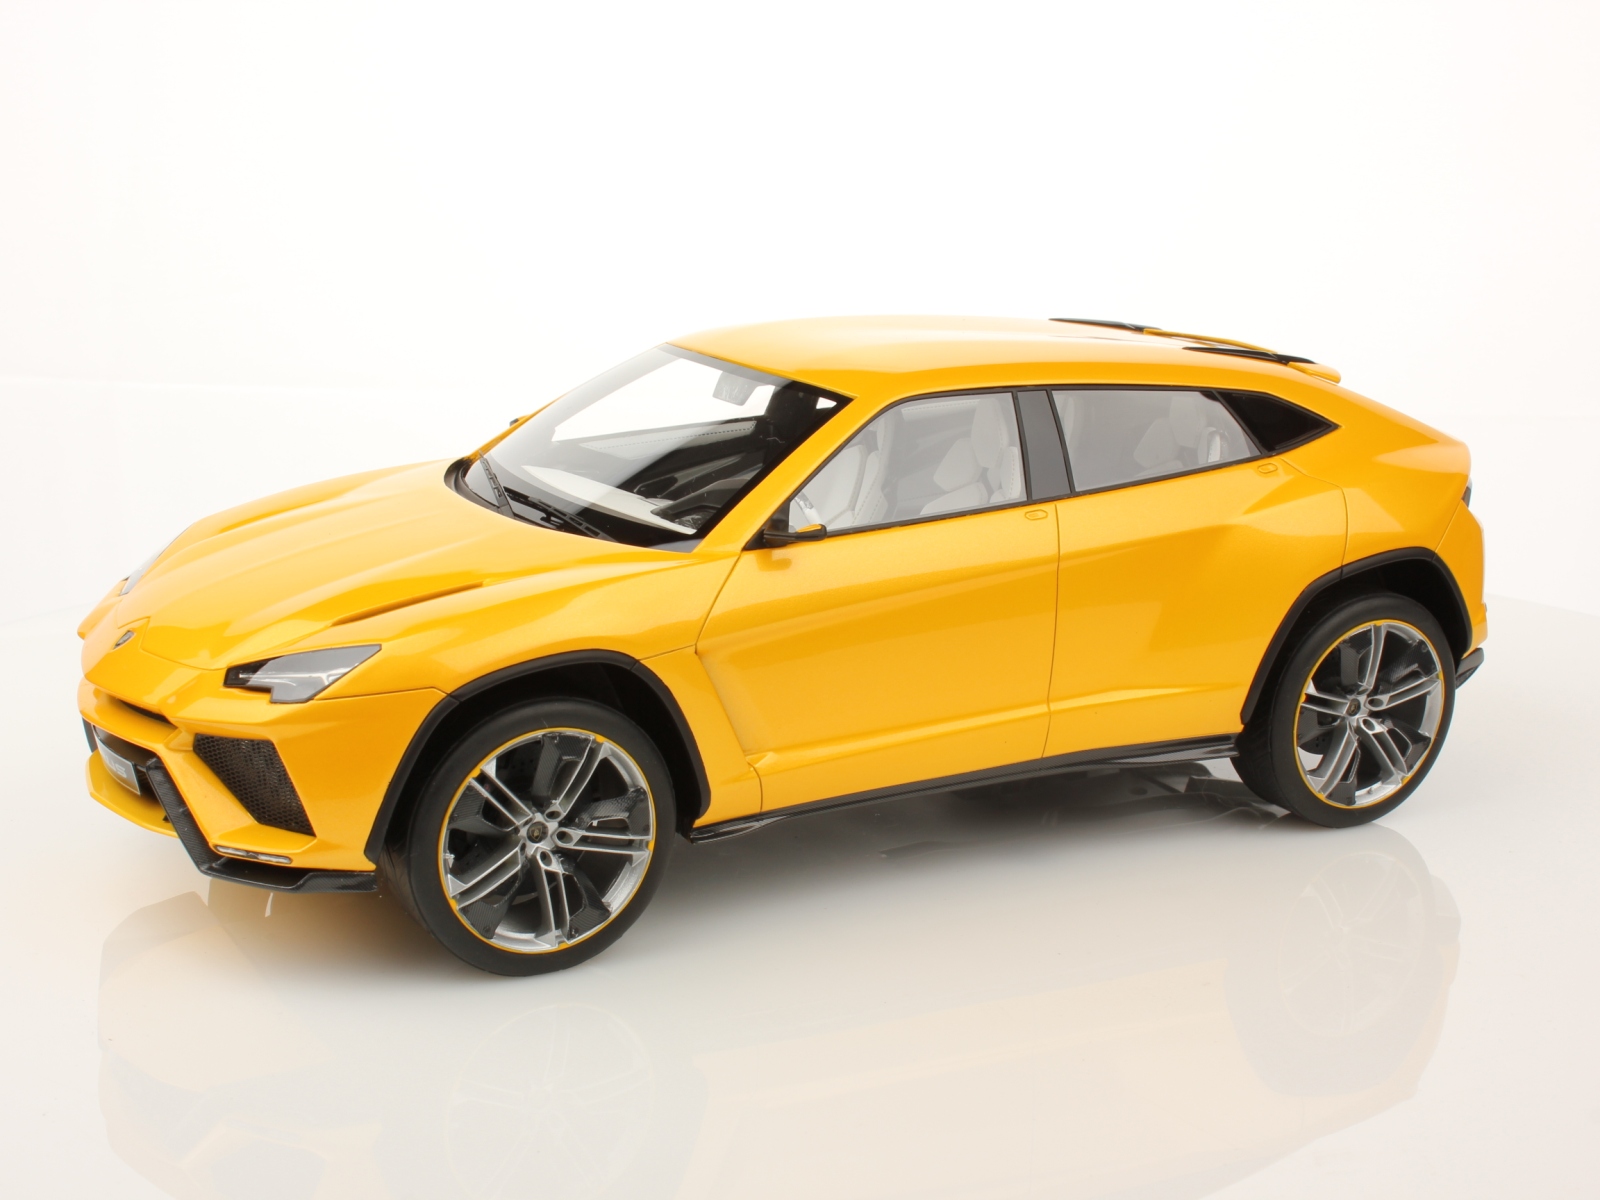 Lamborghini Urus Production Officially Confirmed for 2018 ...